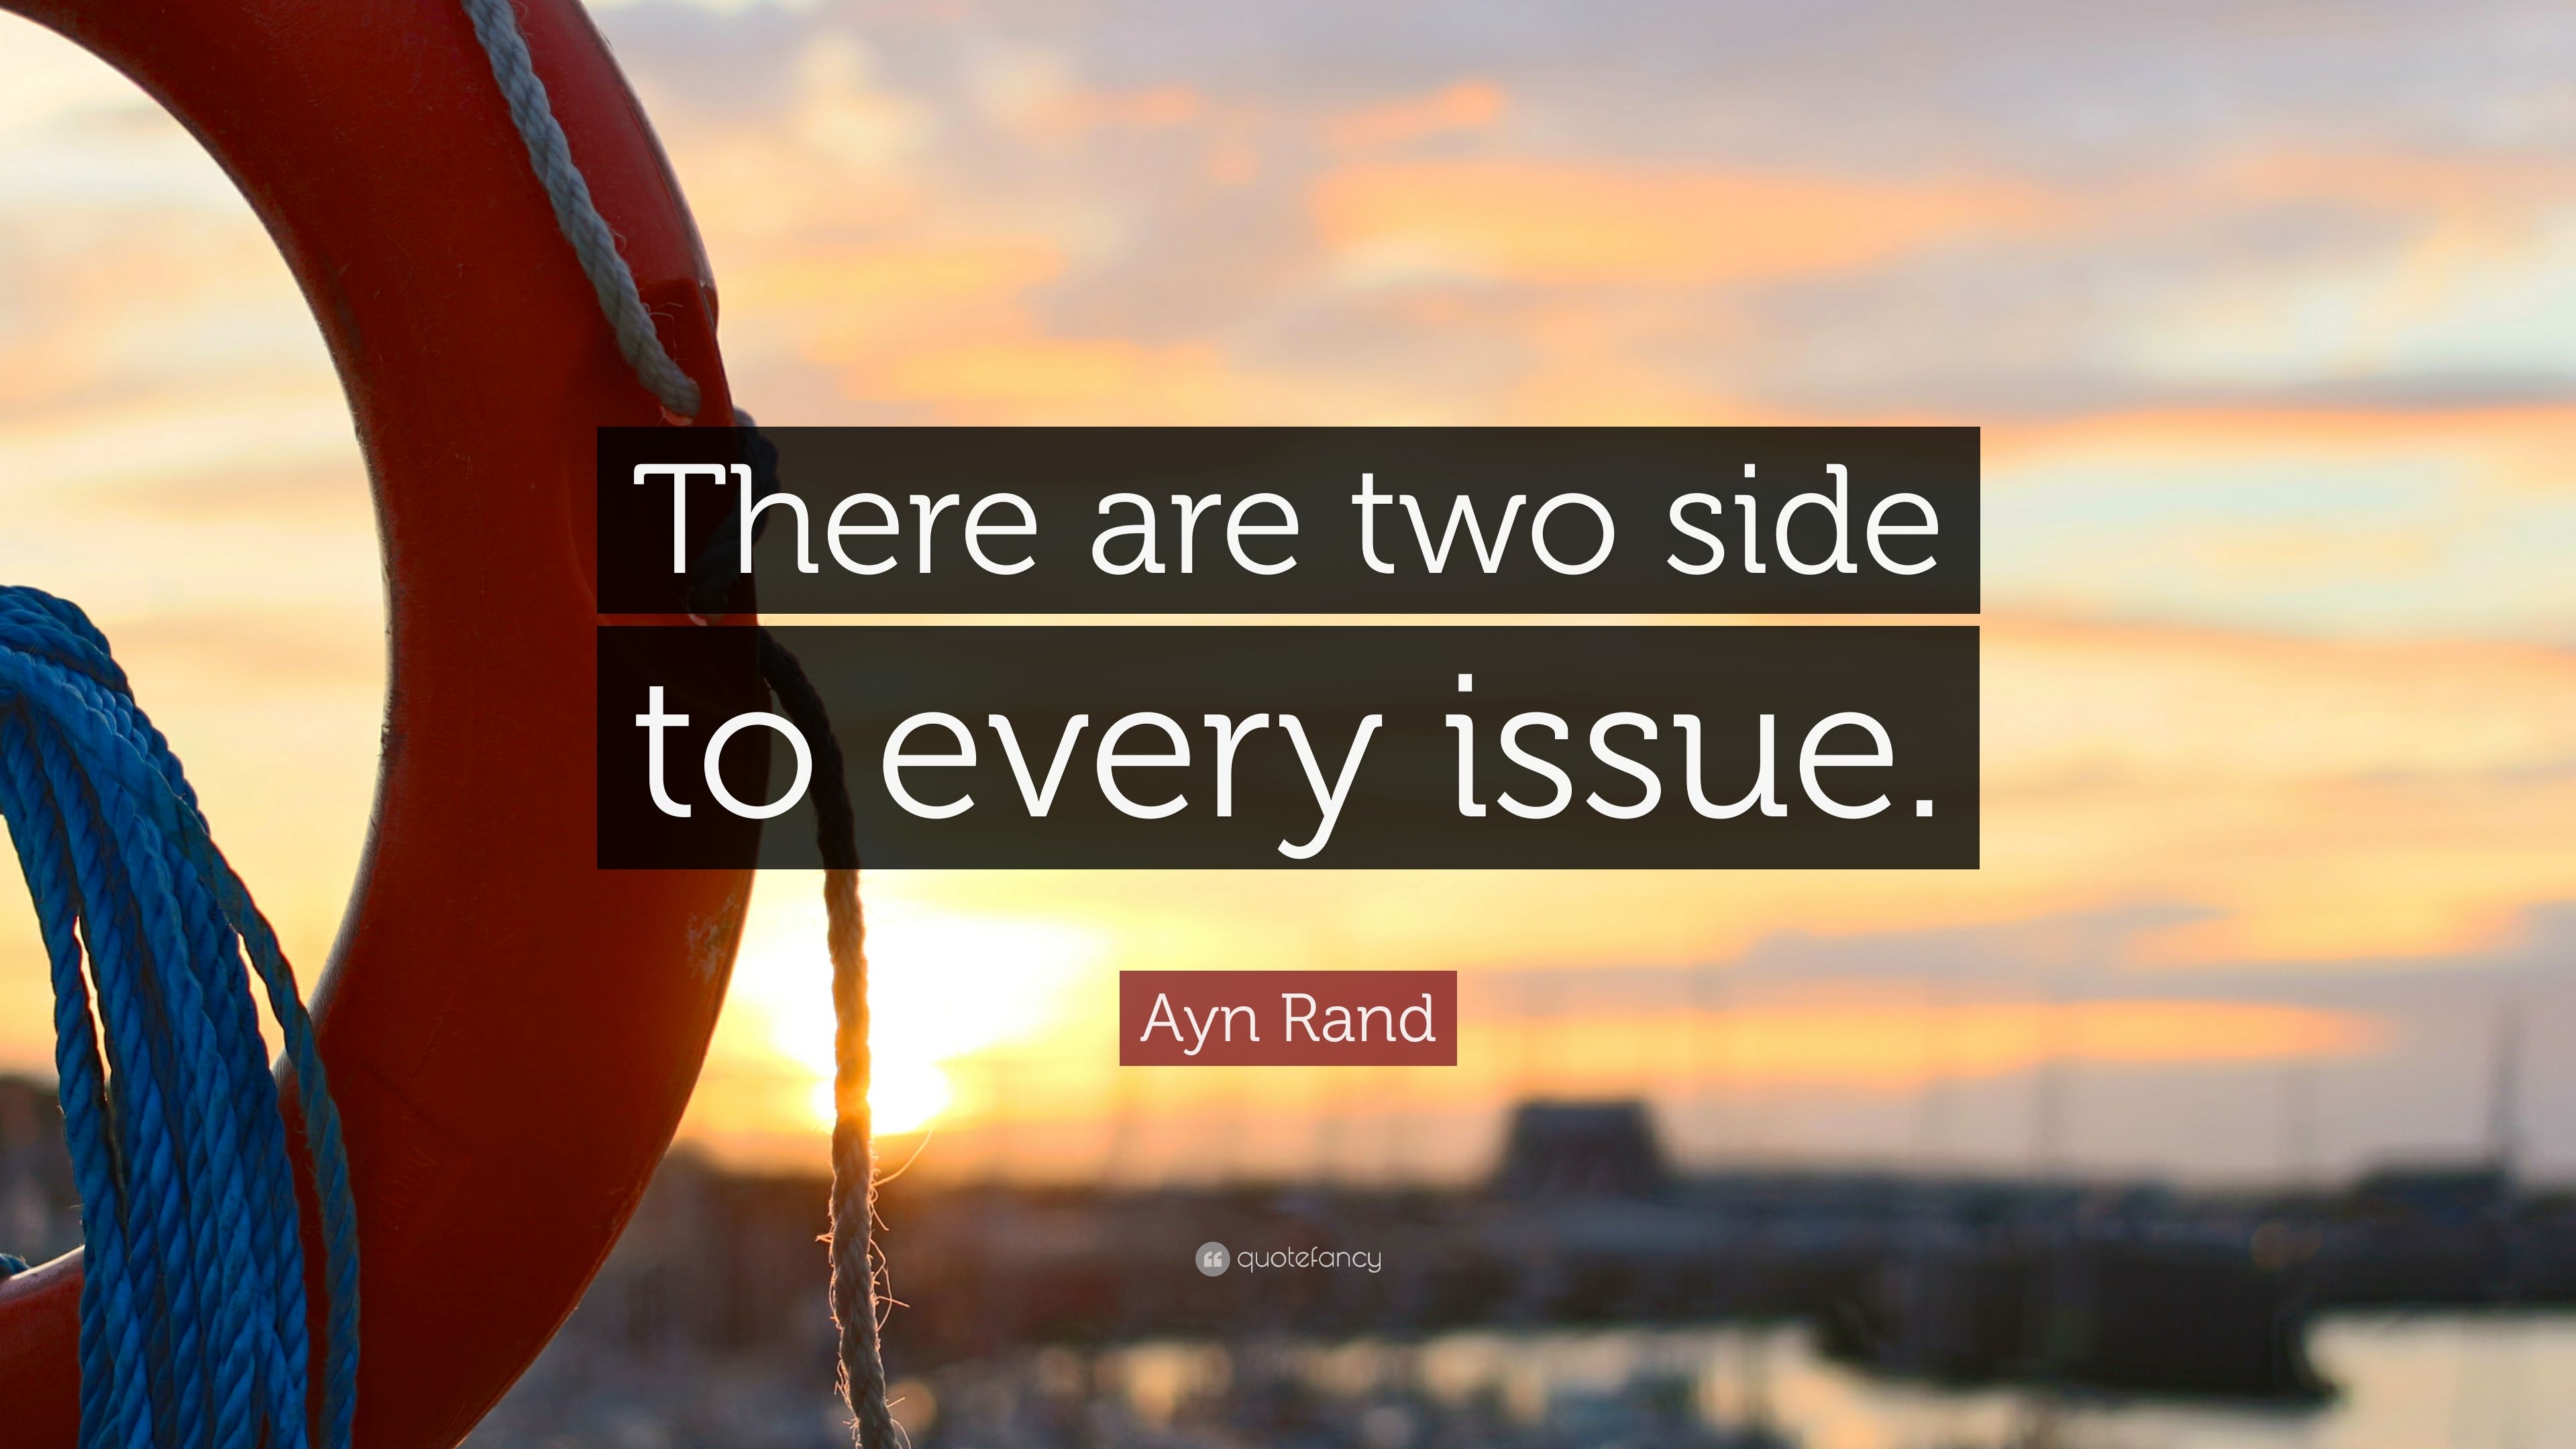 Ayn Rand Quote: “There are two side to .quotefancy.com